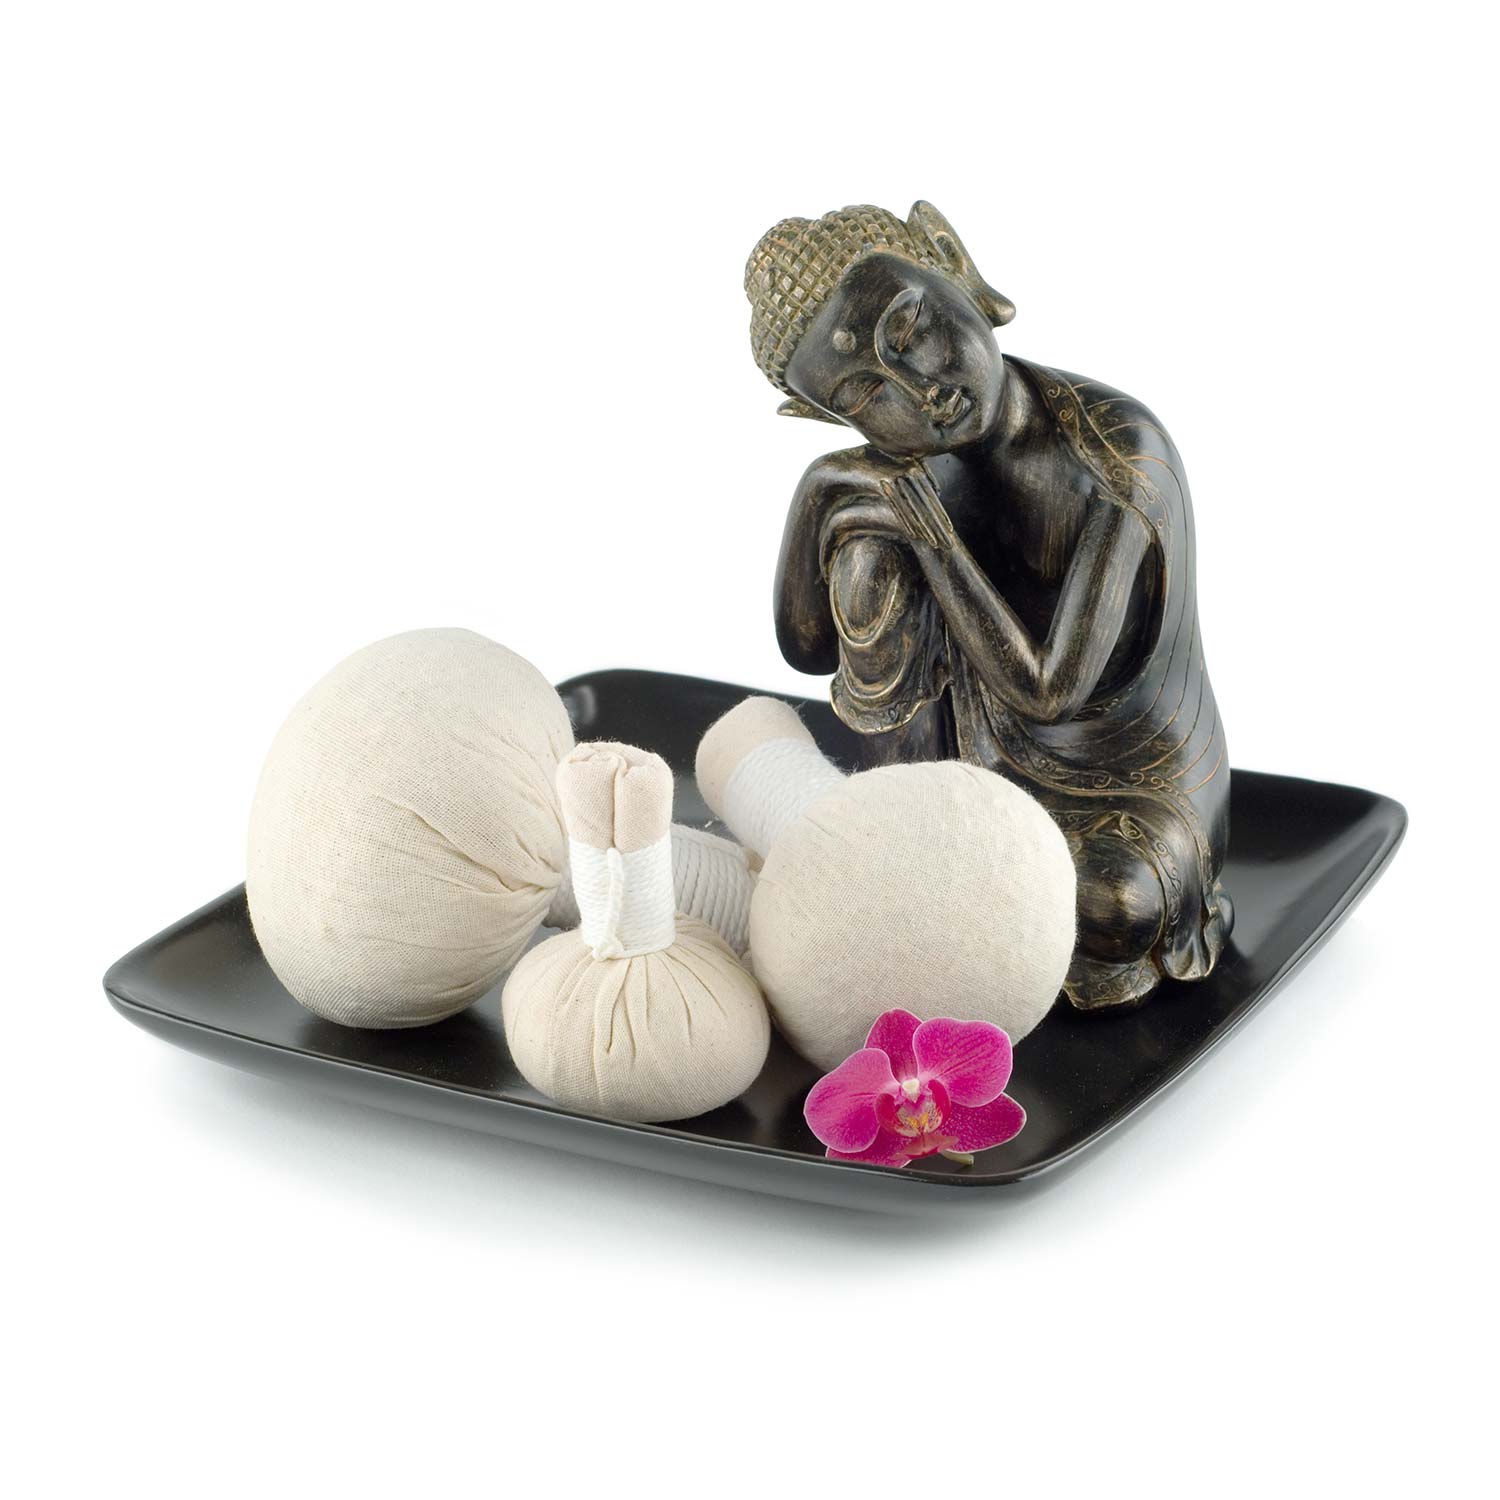 Thai hot massage compresses on a tray with a thoughtful Buddha statue.